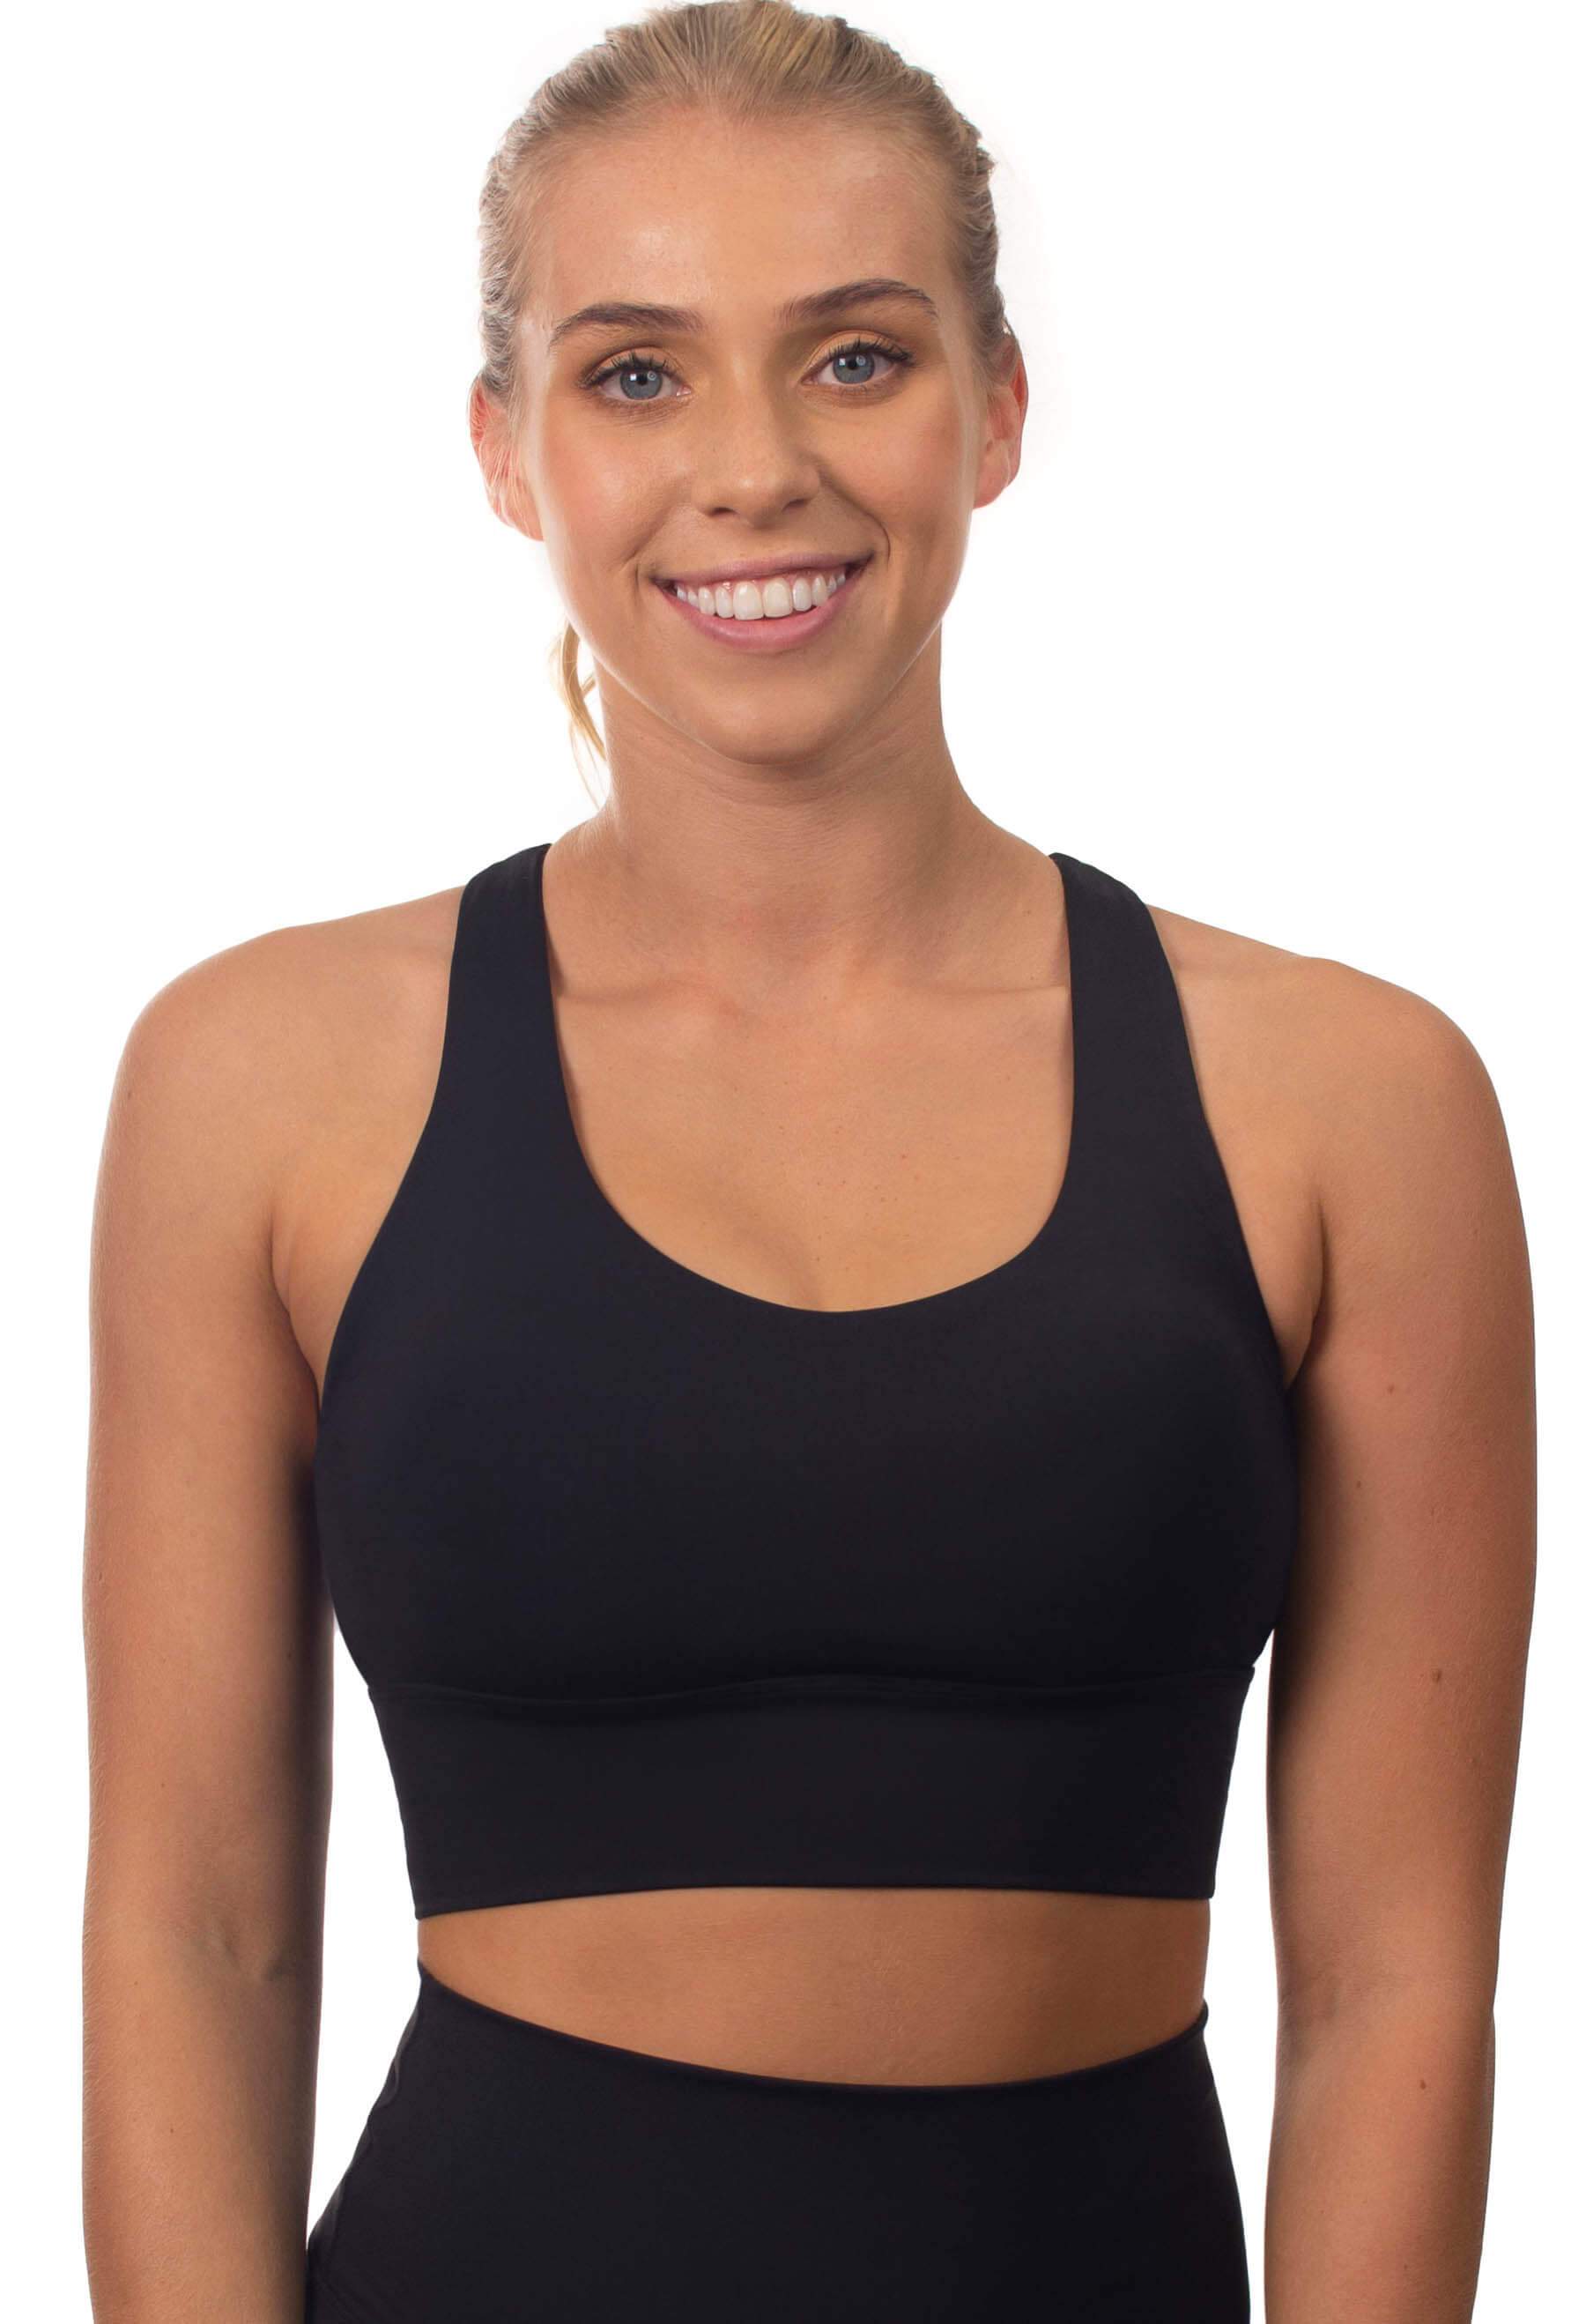 Women's - Compression Fit Face Masks or Sport Bras or Sleeveless